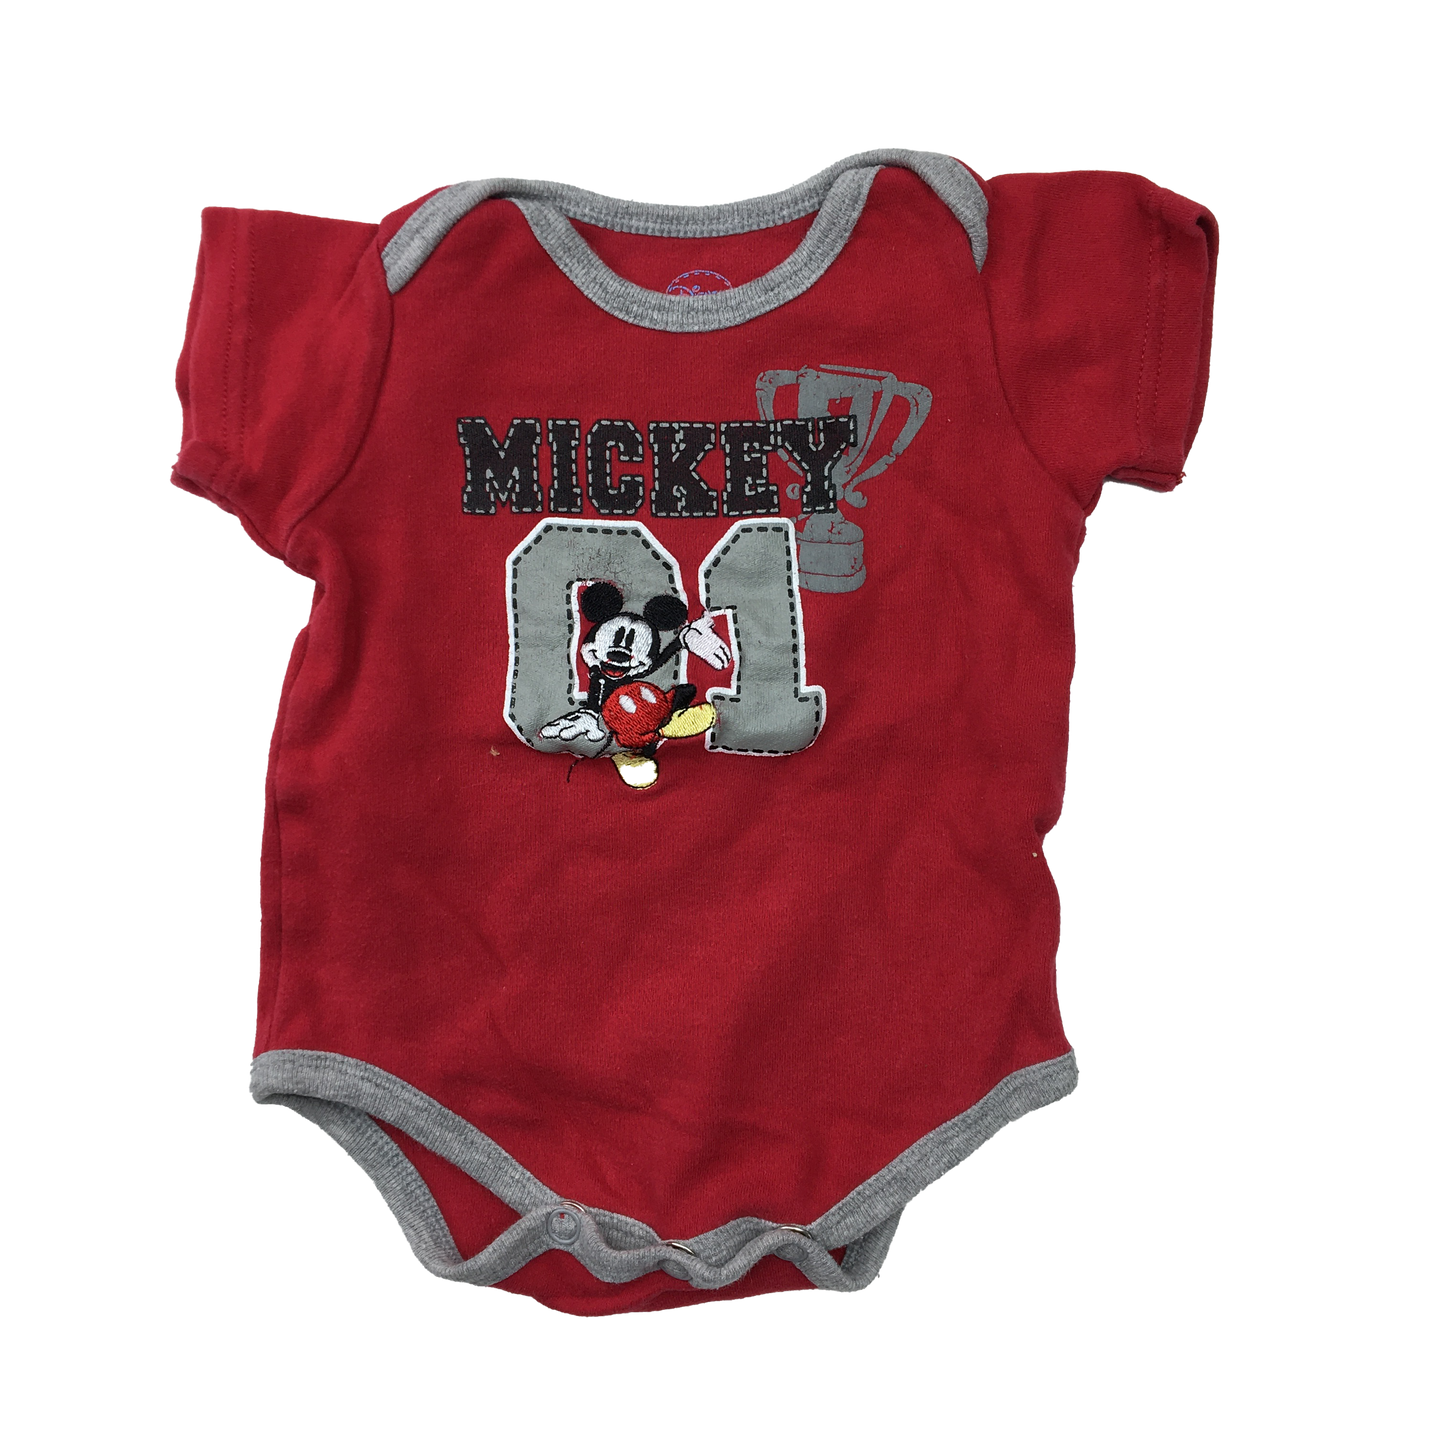 Disney 2-Piece Set Red Onesie & Grey Shorts with Mickey Mouse 0-3M